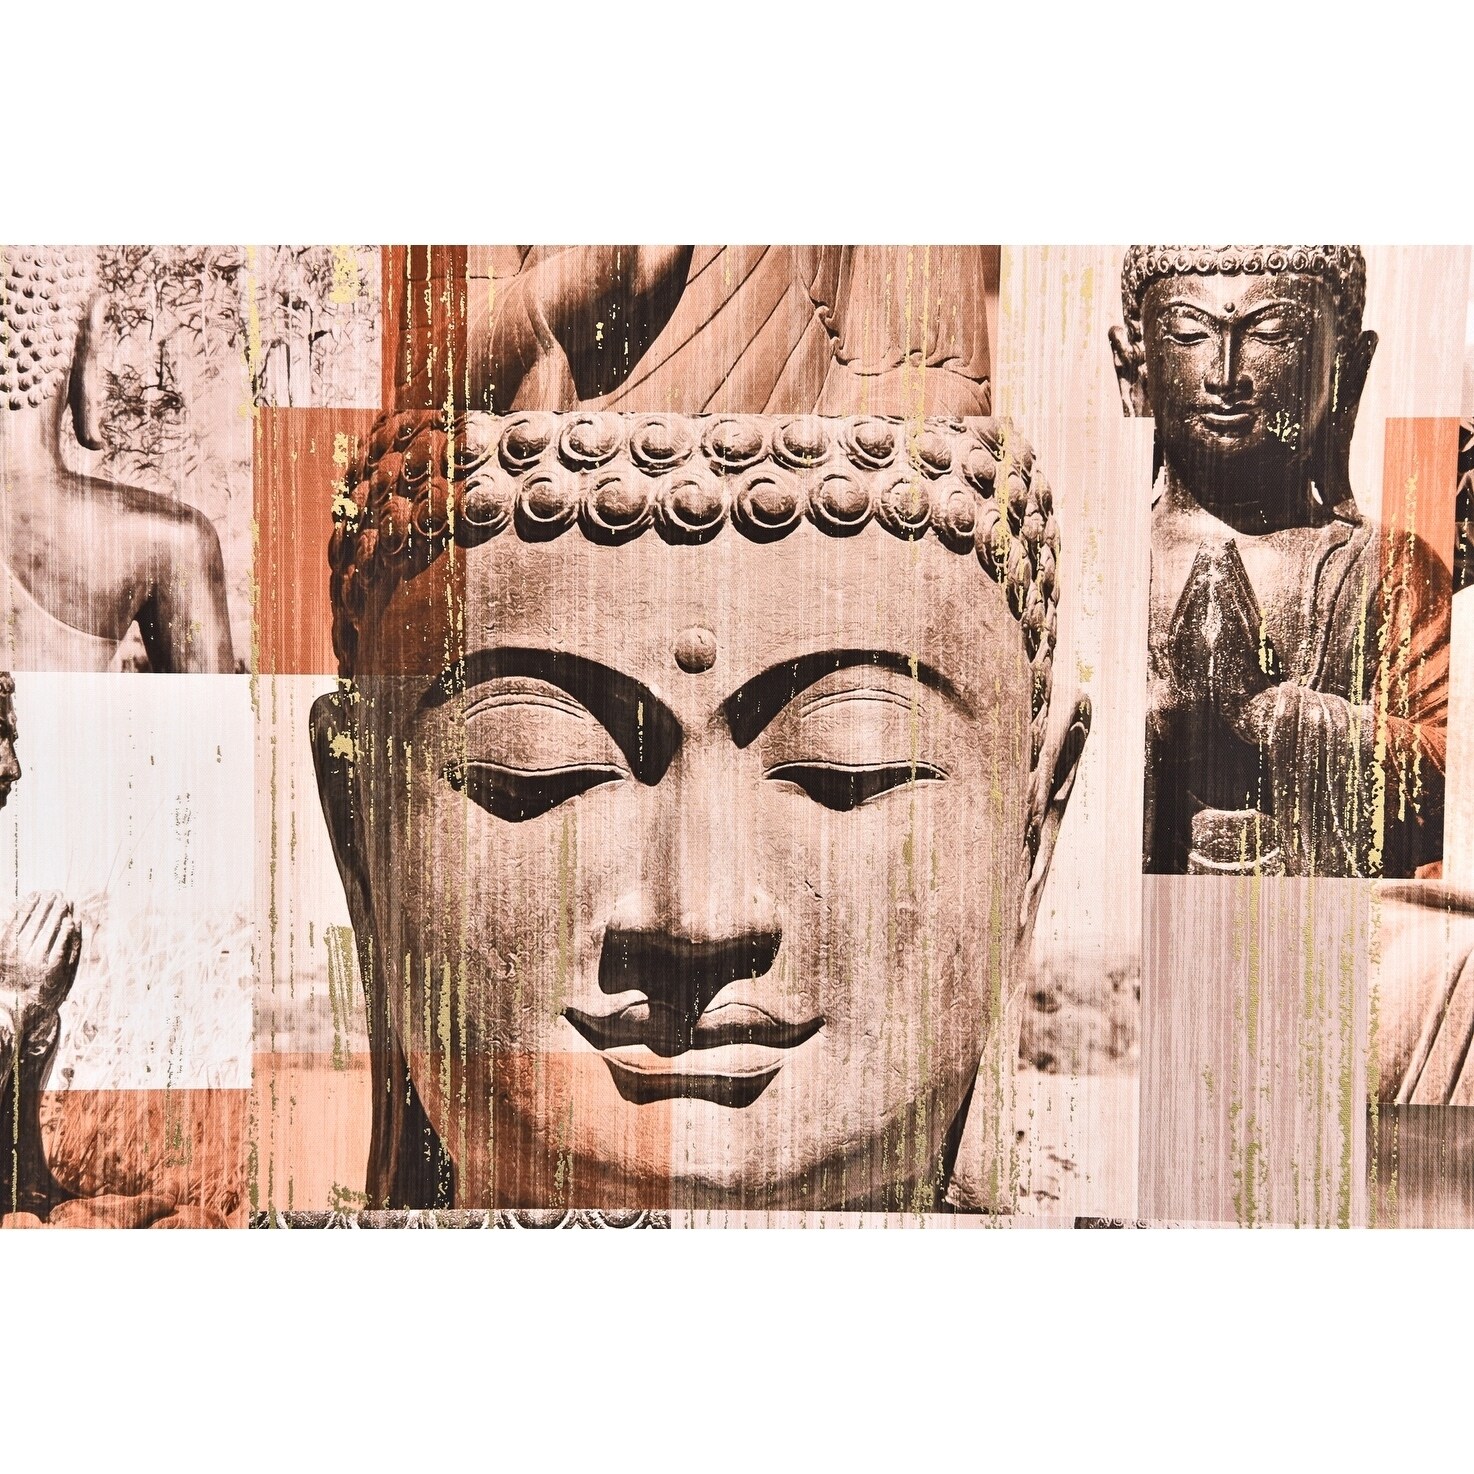 Buddha Statue Zen Stones Candles CANVAS Wall Art Picture Print A4 